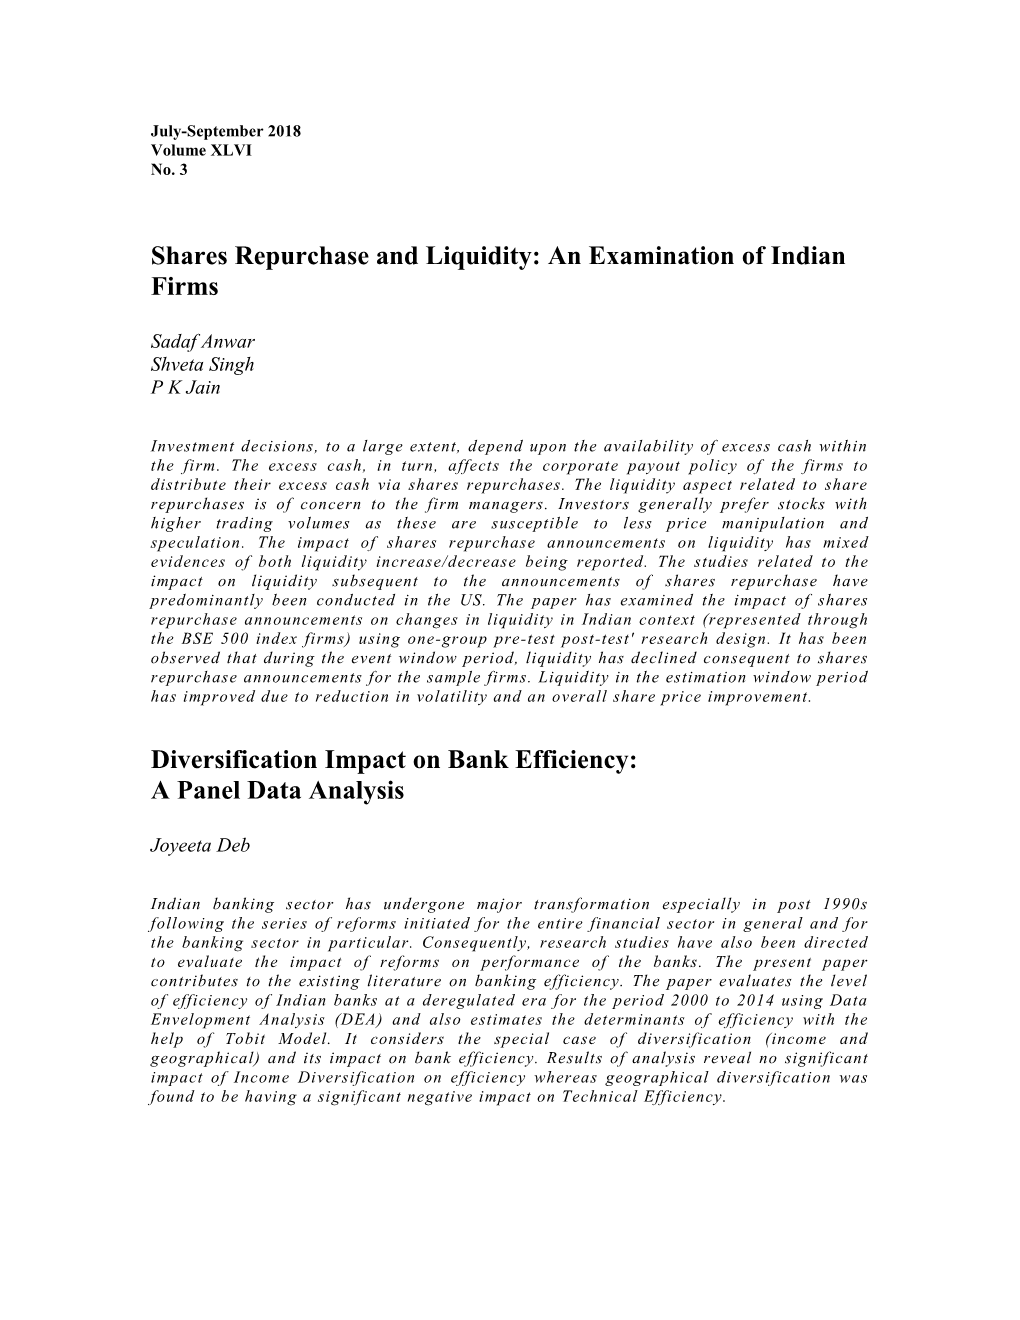 Shares Repurchase and Liquidity: an Examination of Indian Firms